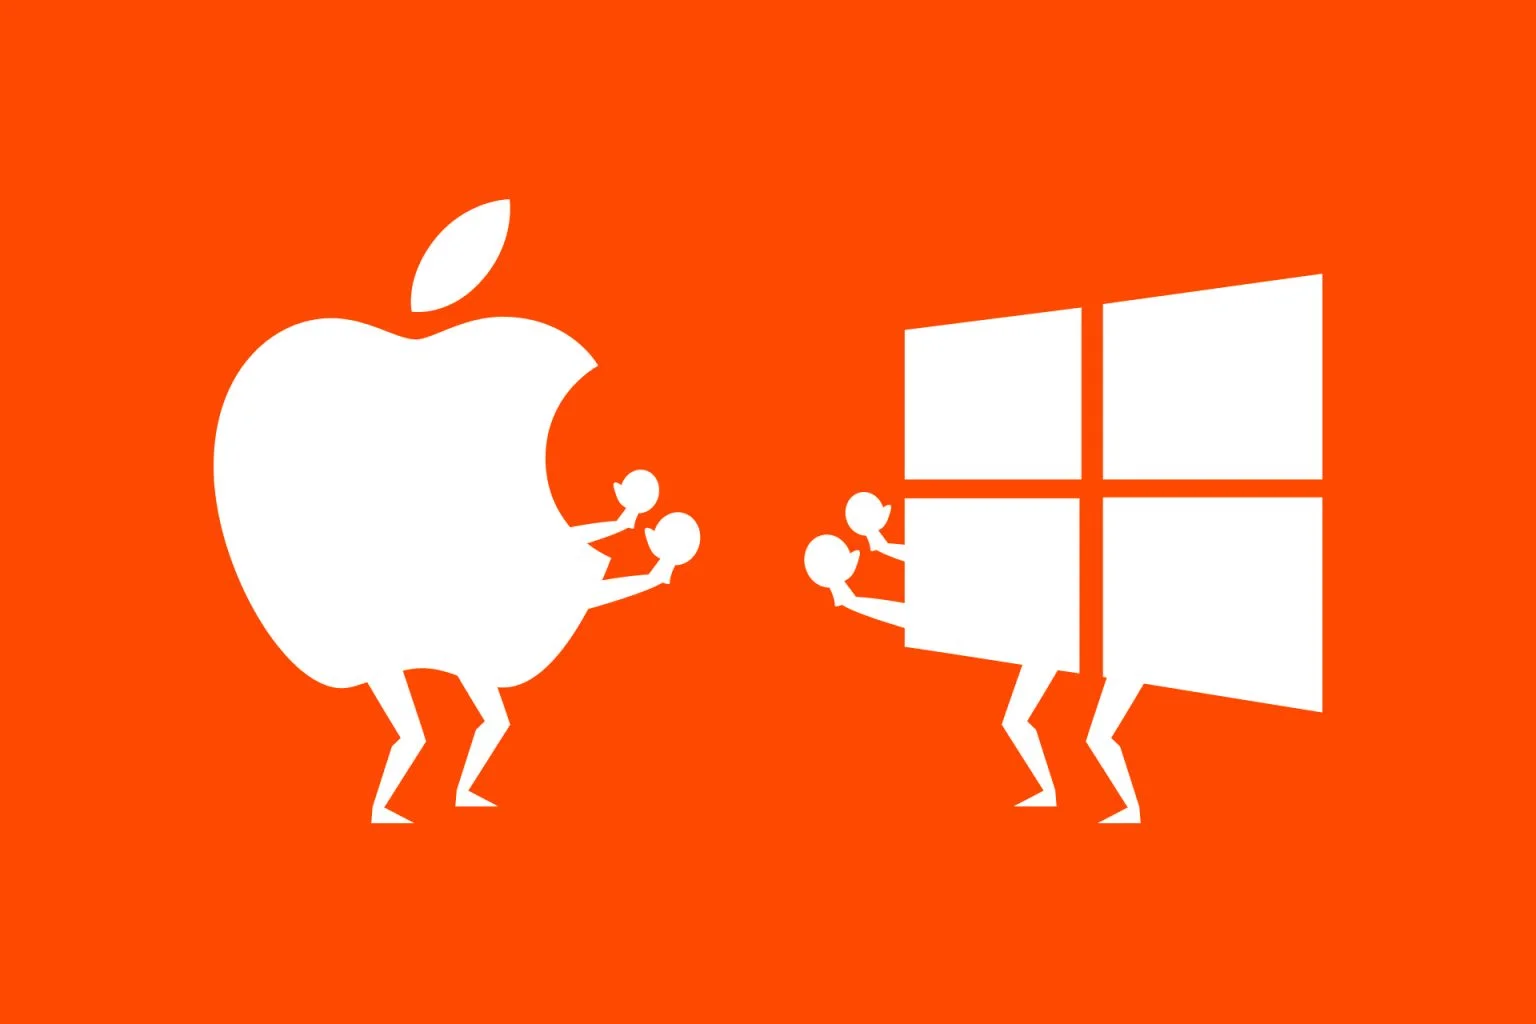 Apple and Microsoft will show in-app ads. What for?